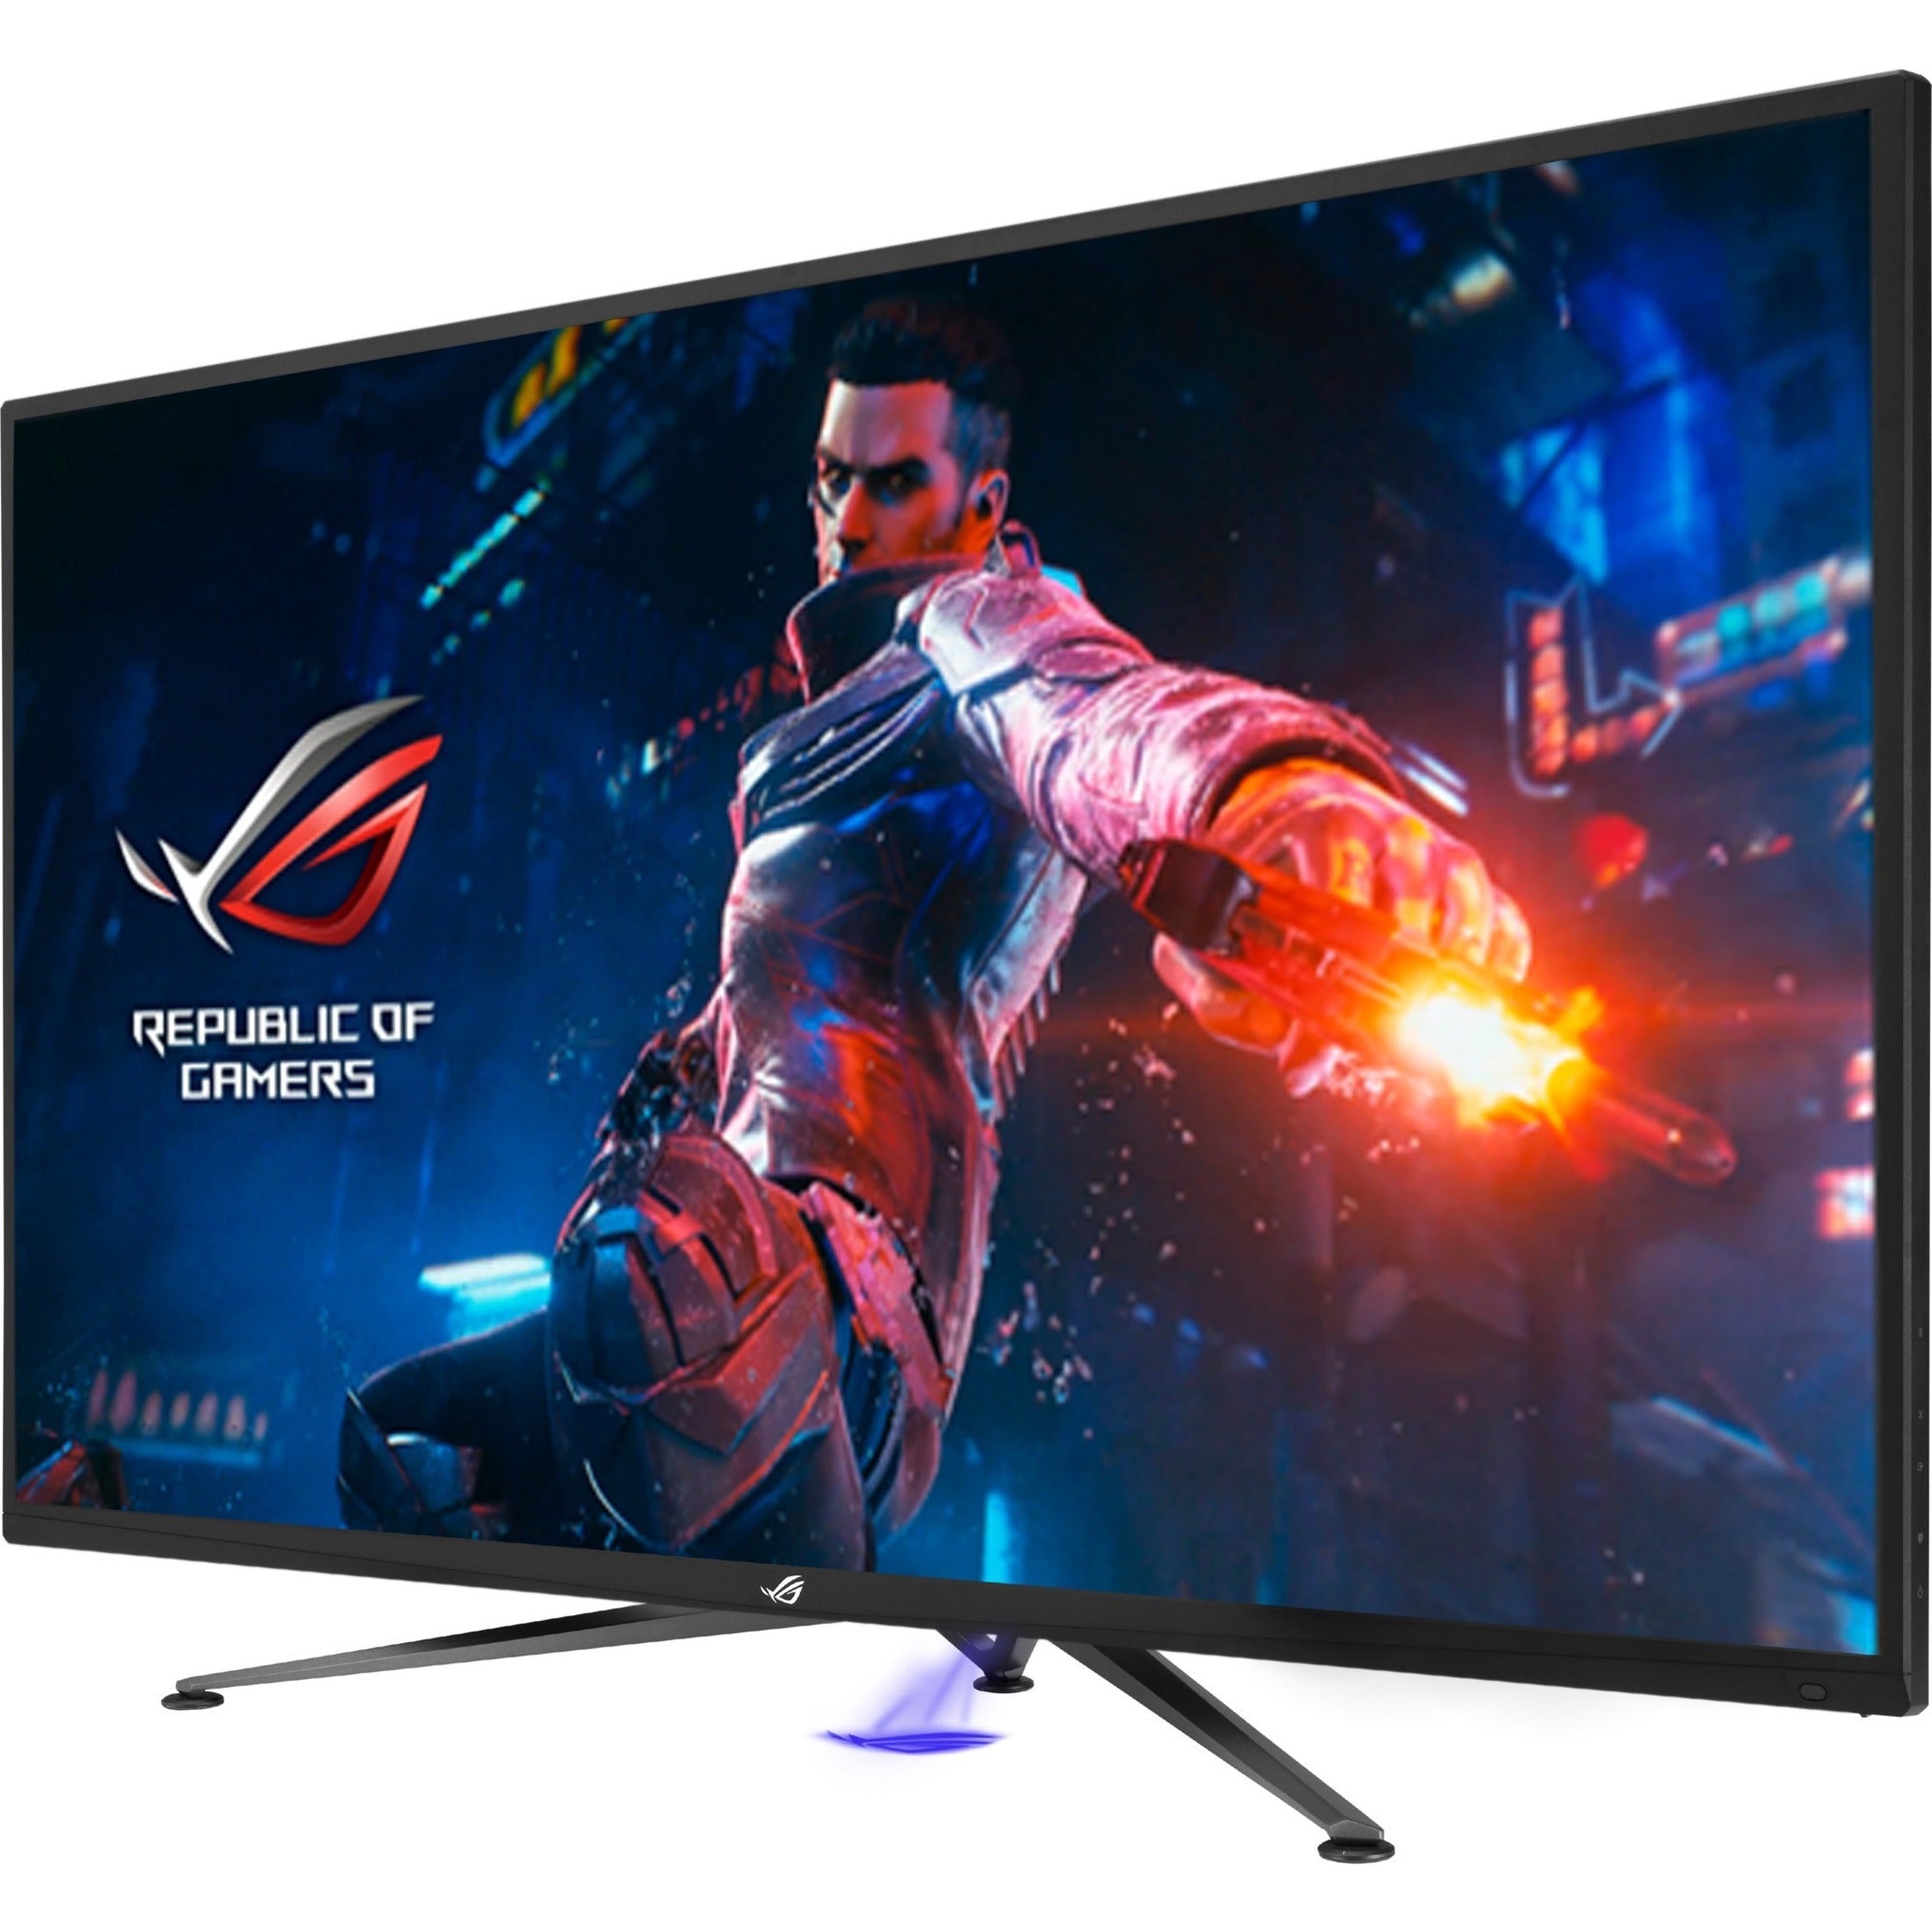 Asus ROG ' Swift `PG43UQ Widescreen Gaming LCD Monitor, 43 4K HDR, 120Hz Refresh Rate, G-sync Compatible